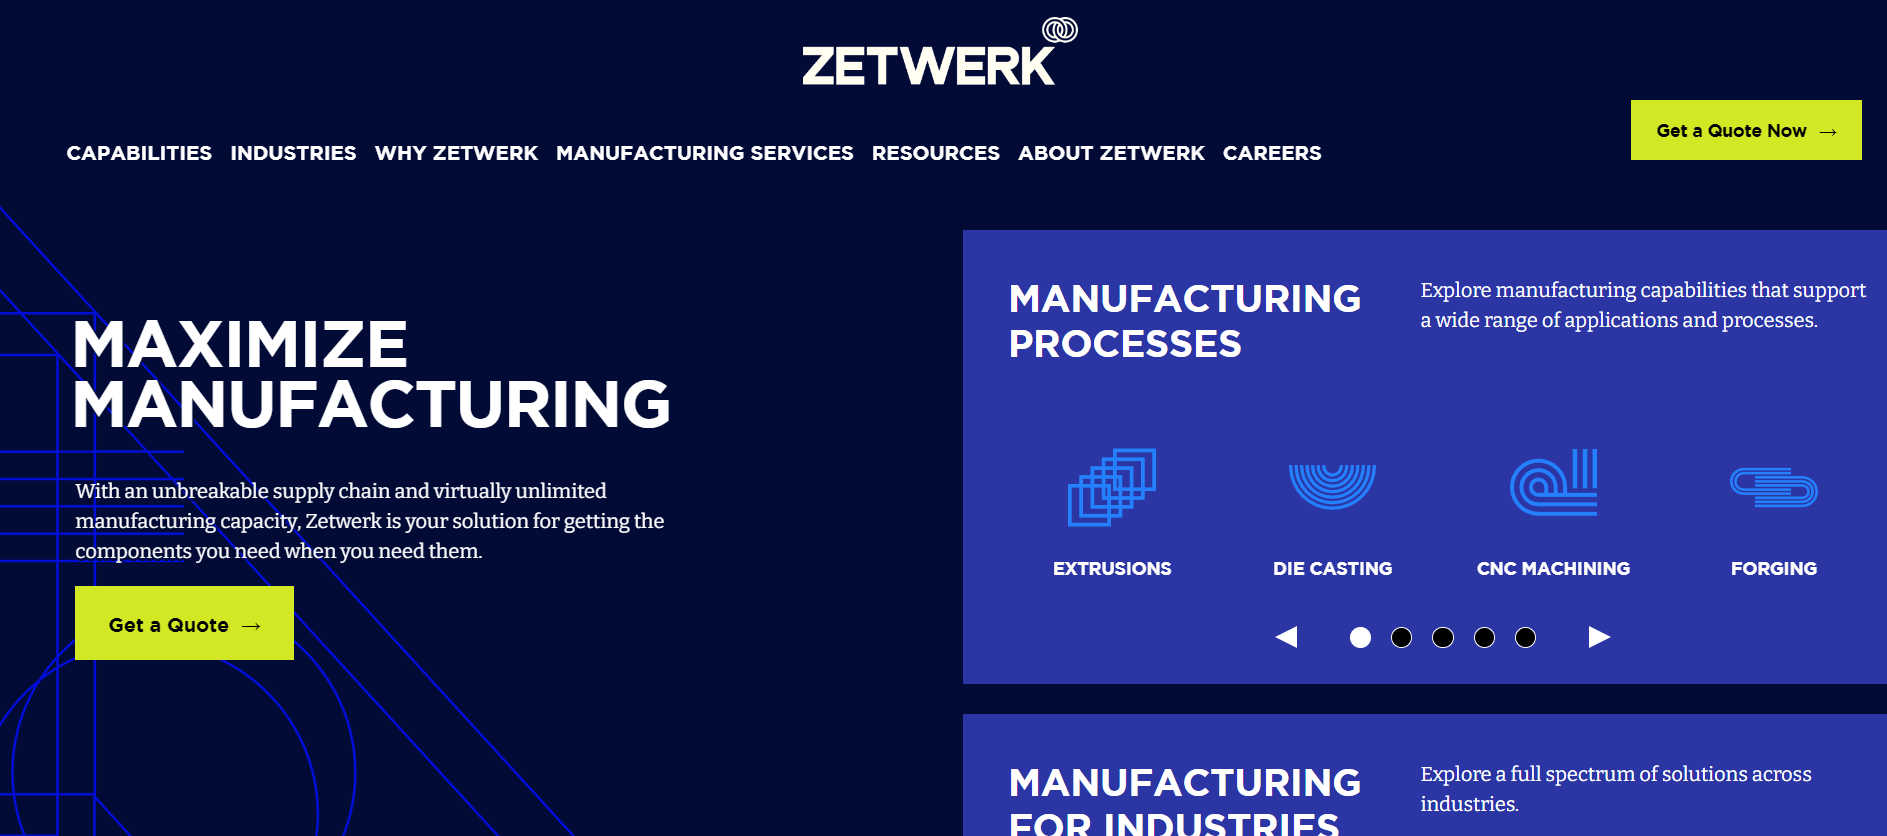 Zetwerk is committed to investing resources in renewable power solutions to  provide decarbonised energy through innovation, research and development  for... | By Zetwerk | Facebook